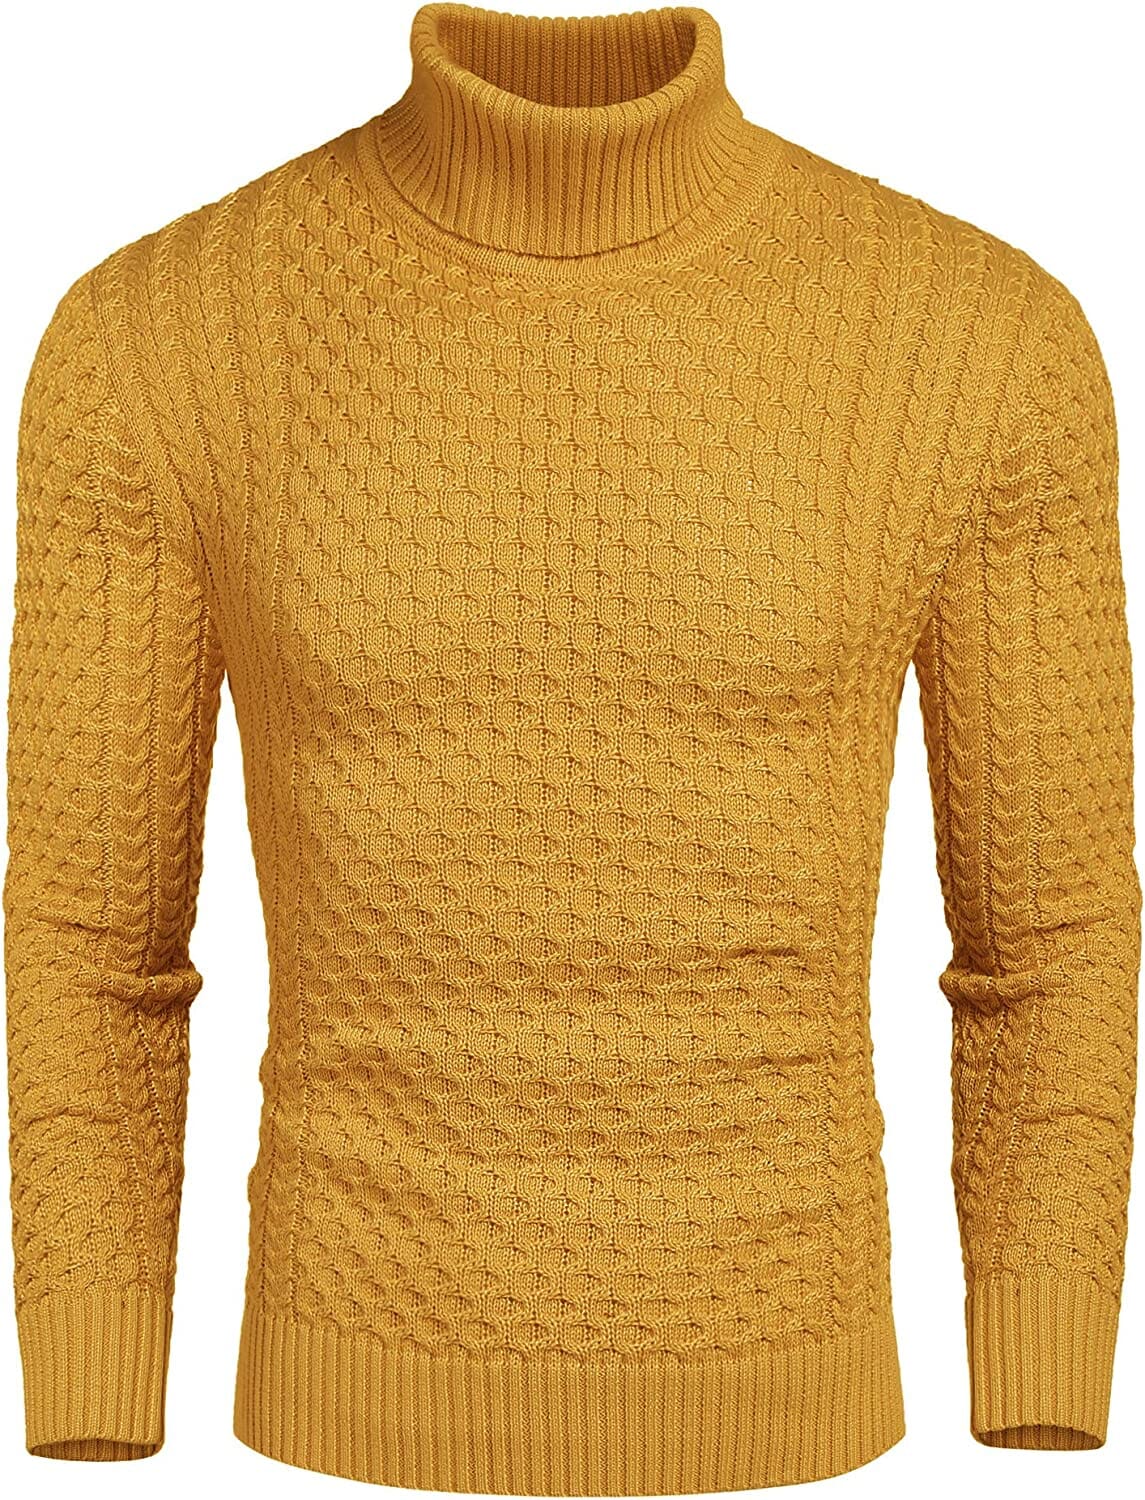 Slim Fit Turtleneck Knitted Twisted Pullover Sweaters (US Only) Sweaters Coofandy's Yellow S 